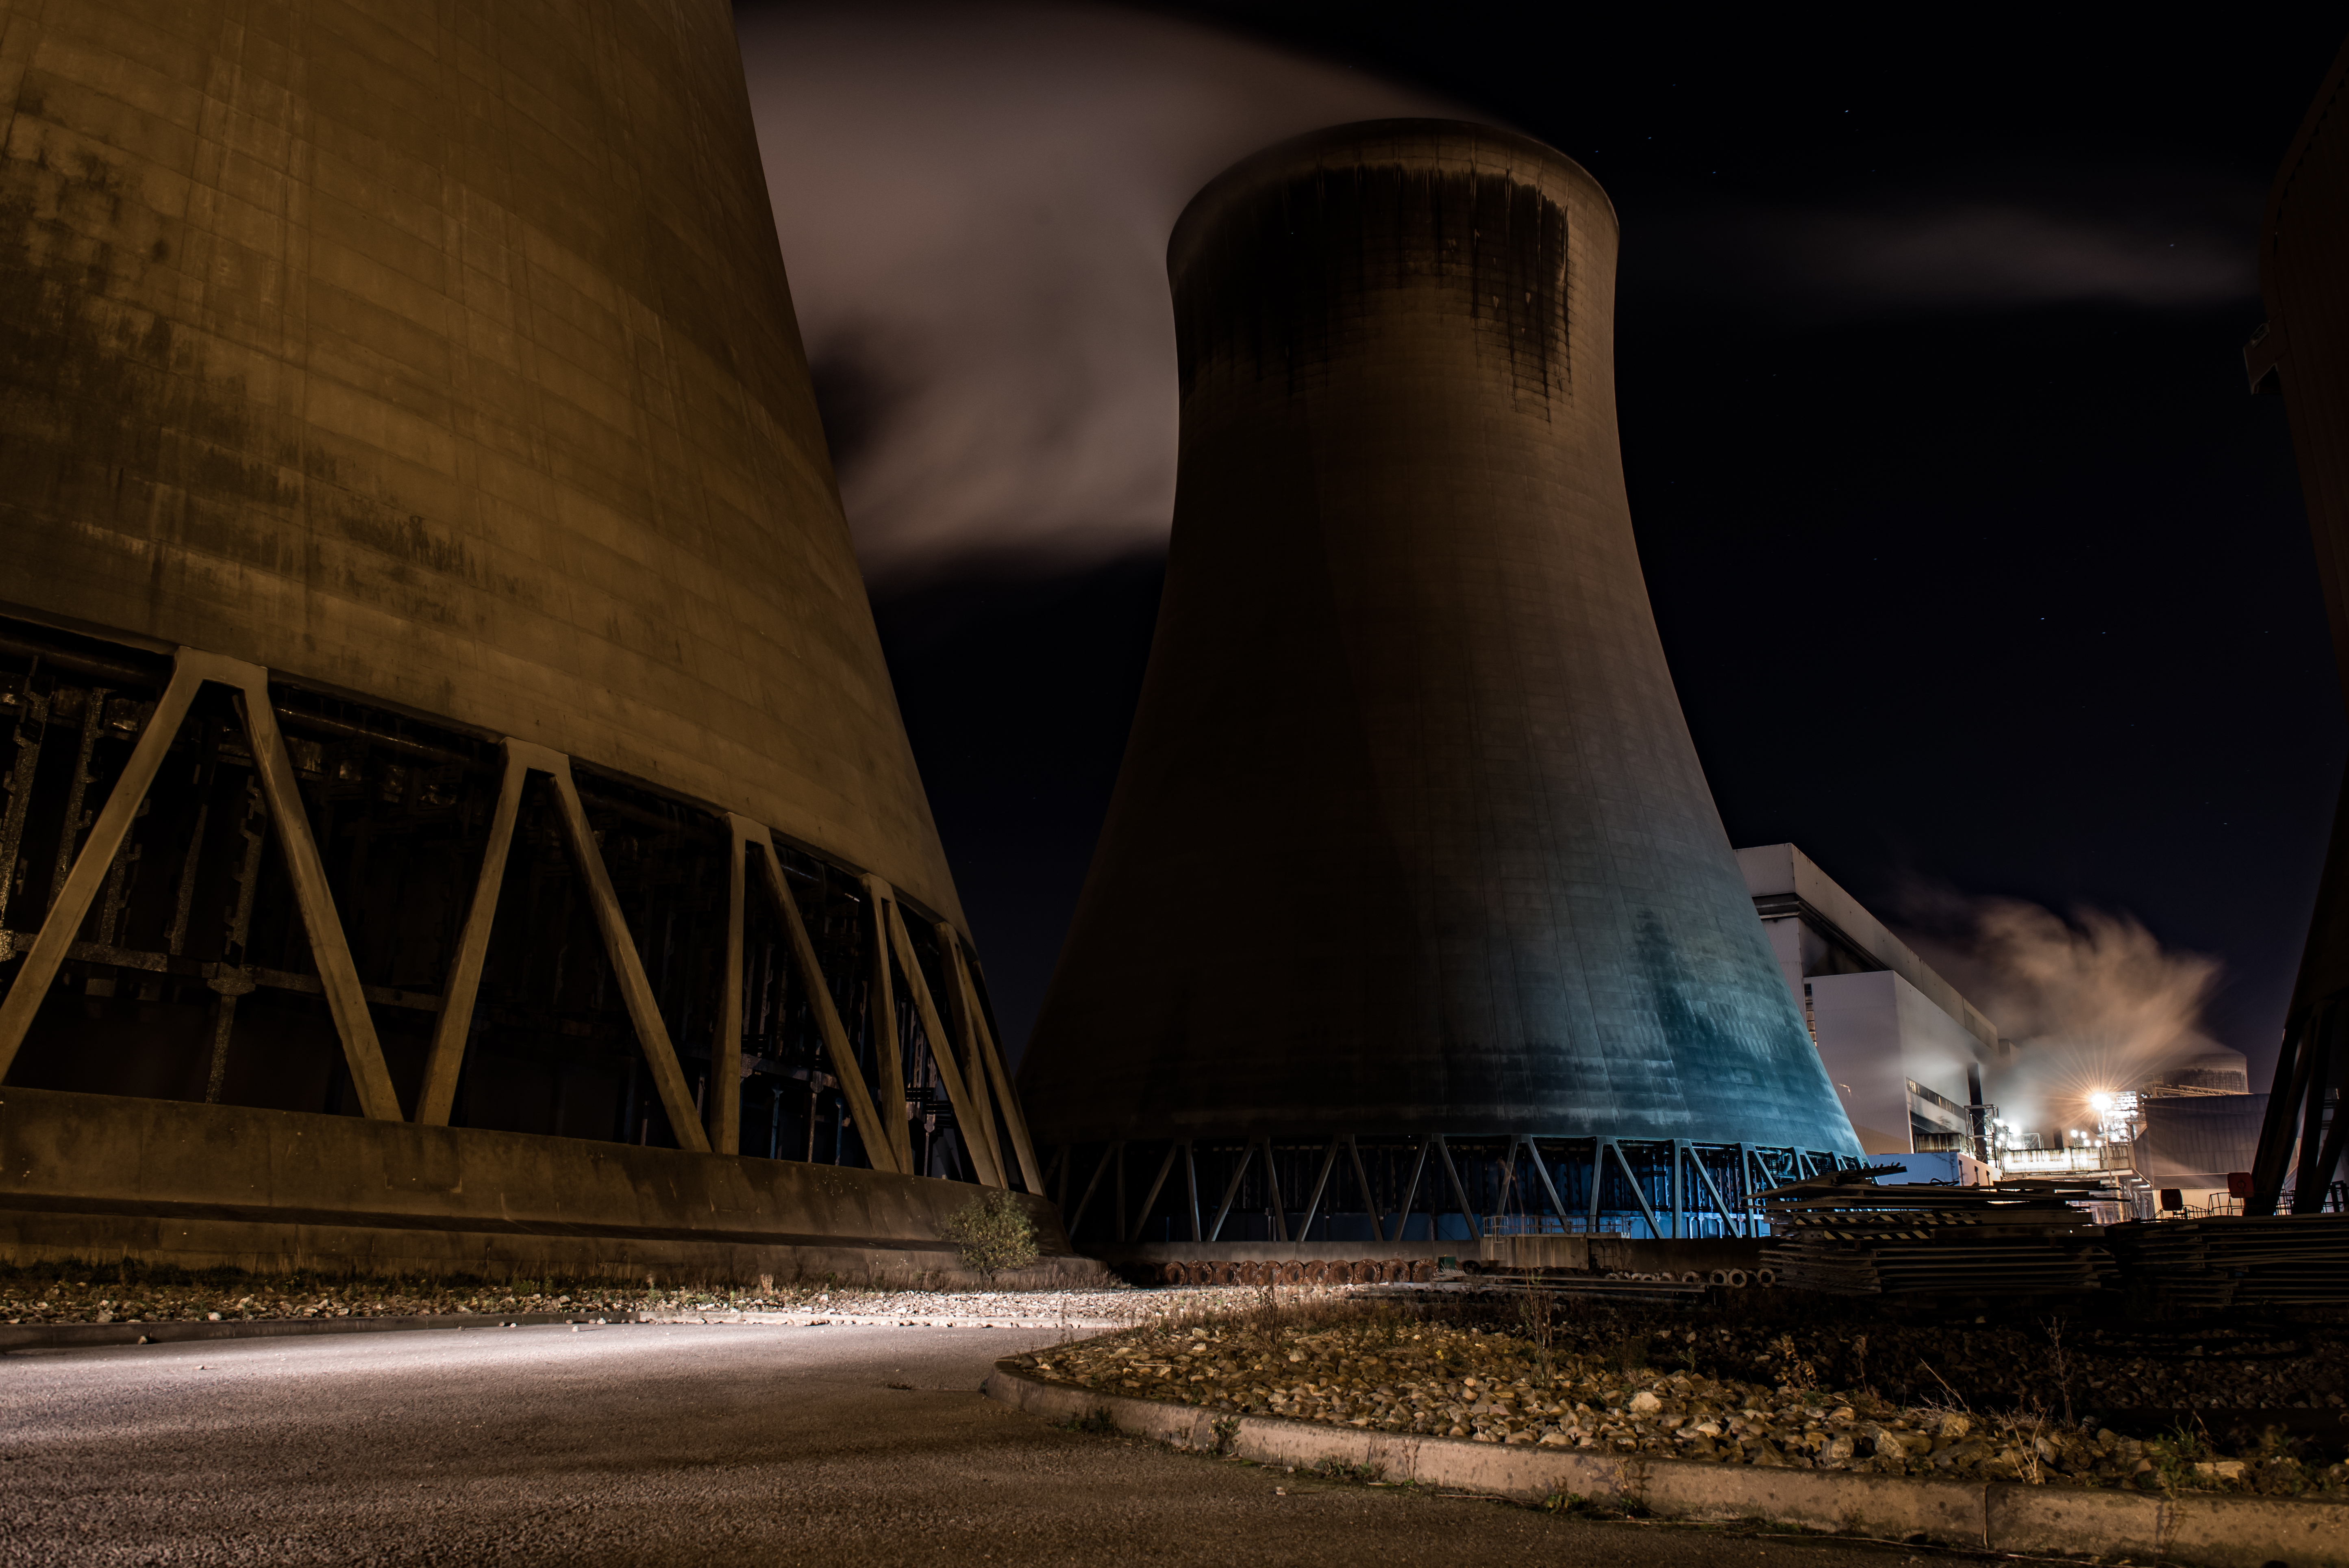 The nightshift at Drax Power Station